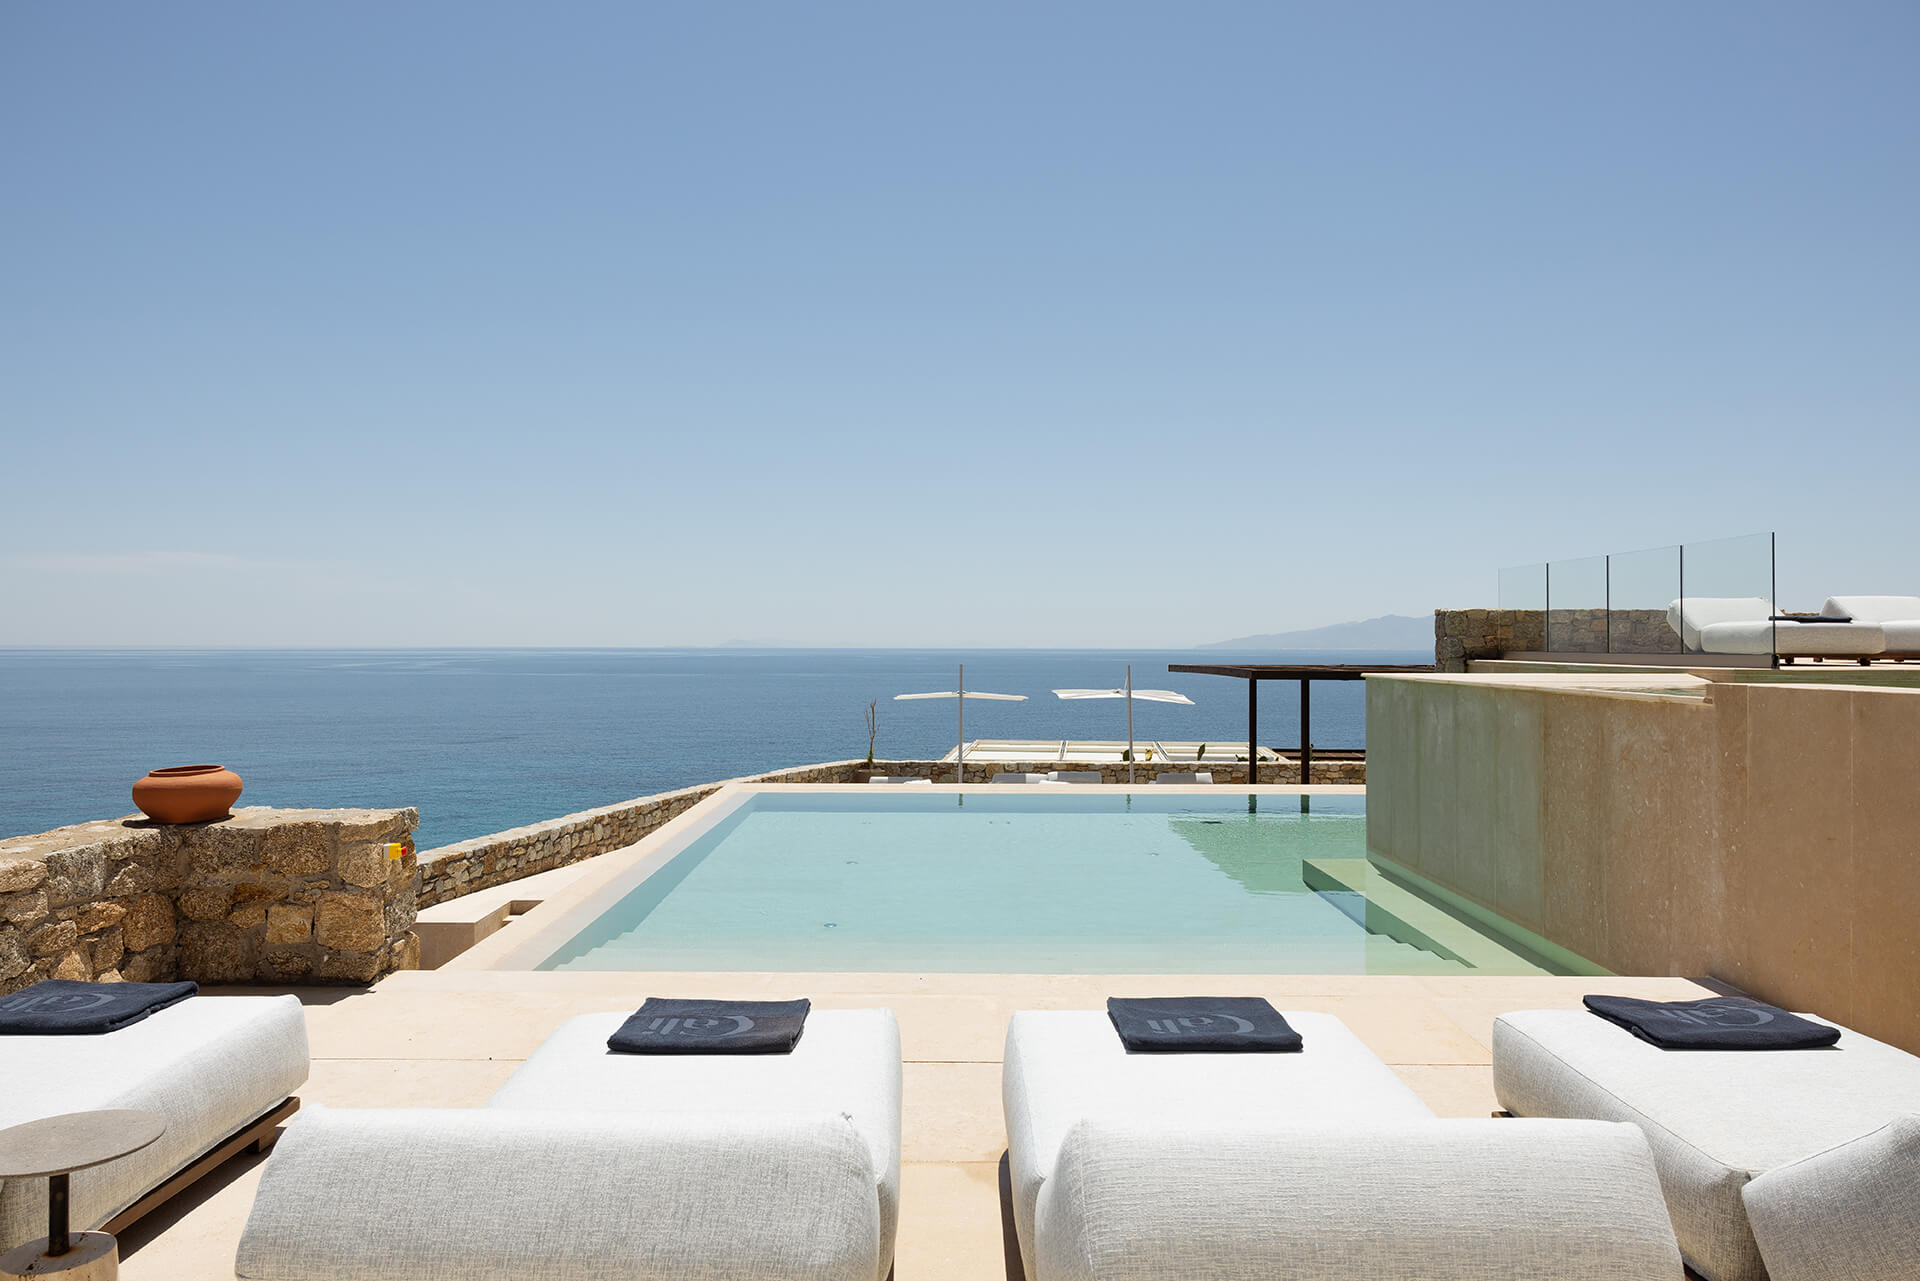 Villa Calliope 2nd Terrace with Pool: A stunning shot of the villa's terrace, featuring a pool overlooking the azure waters of the Aegean Sea.